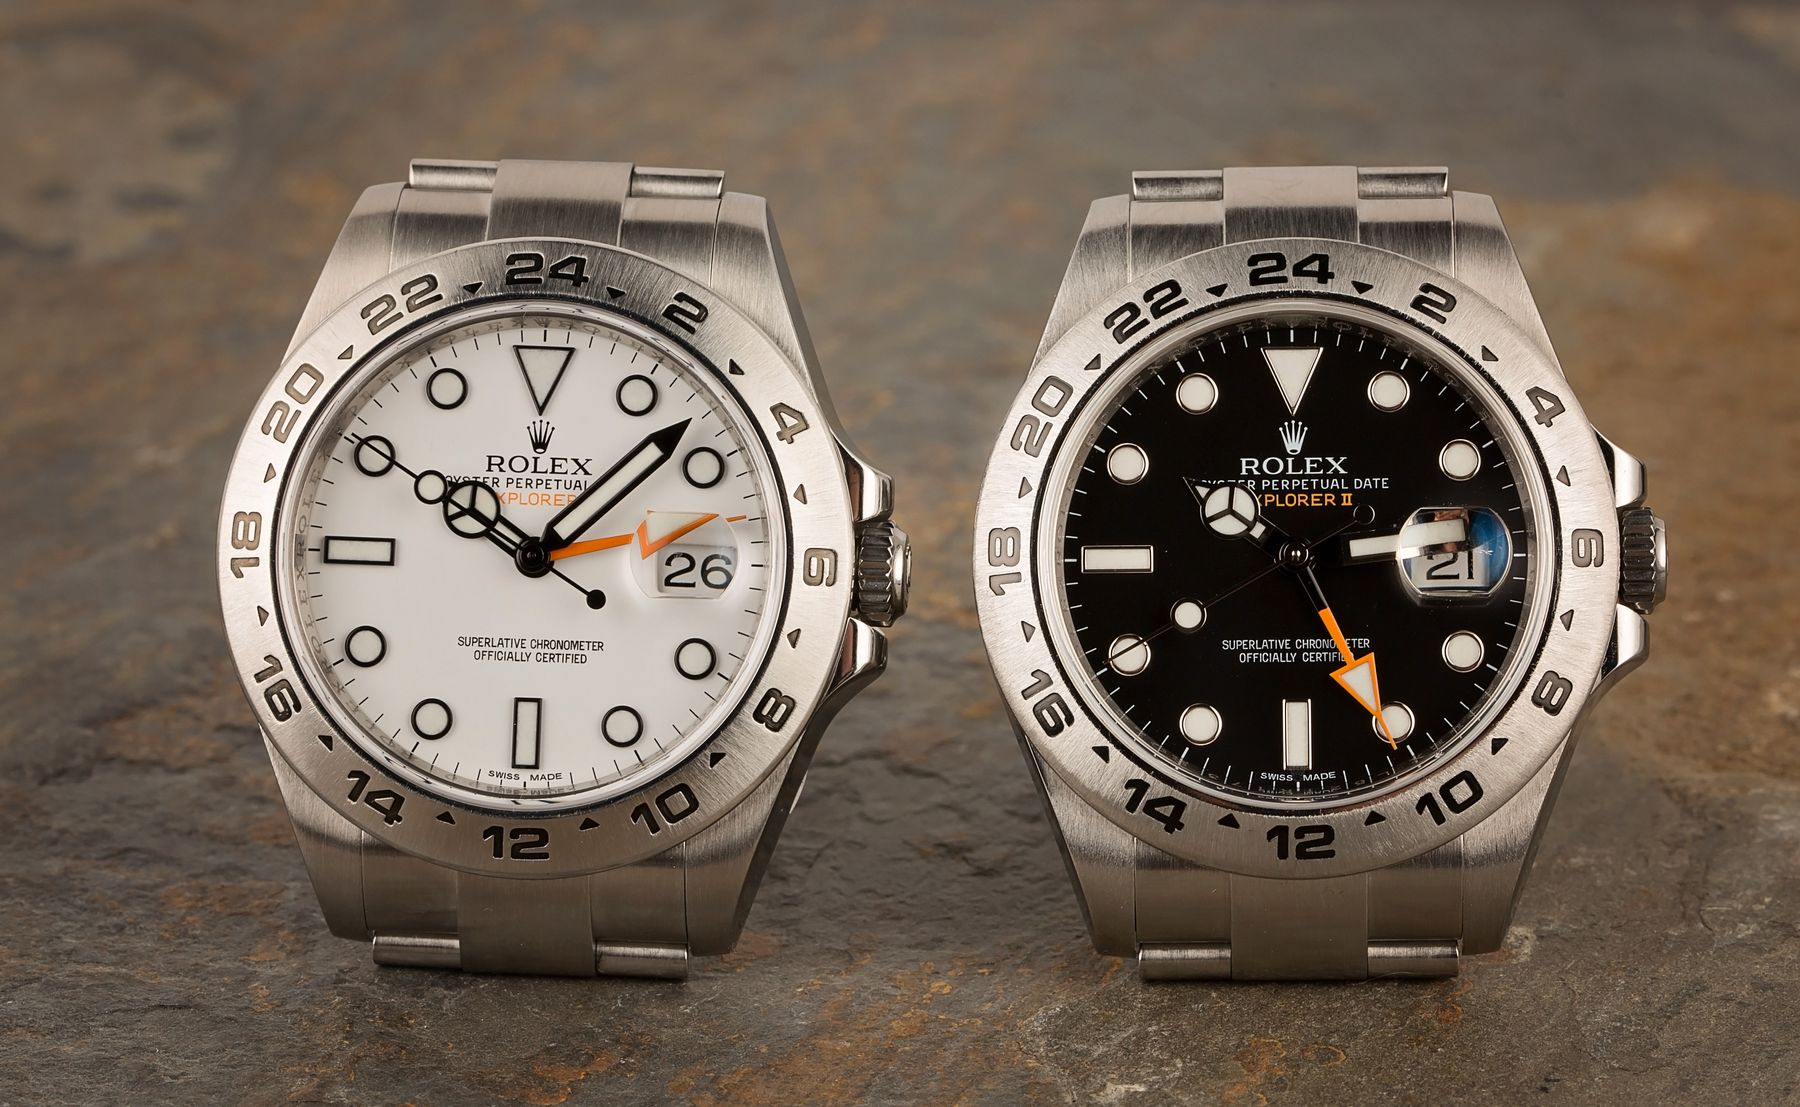 How to Use the Rolex Explorer II Like a GMT Watch